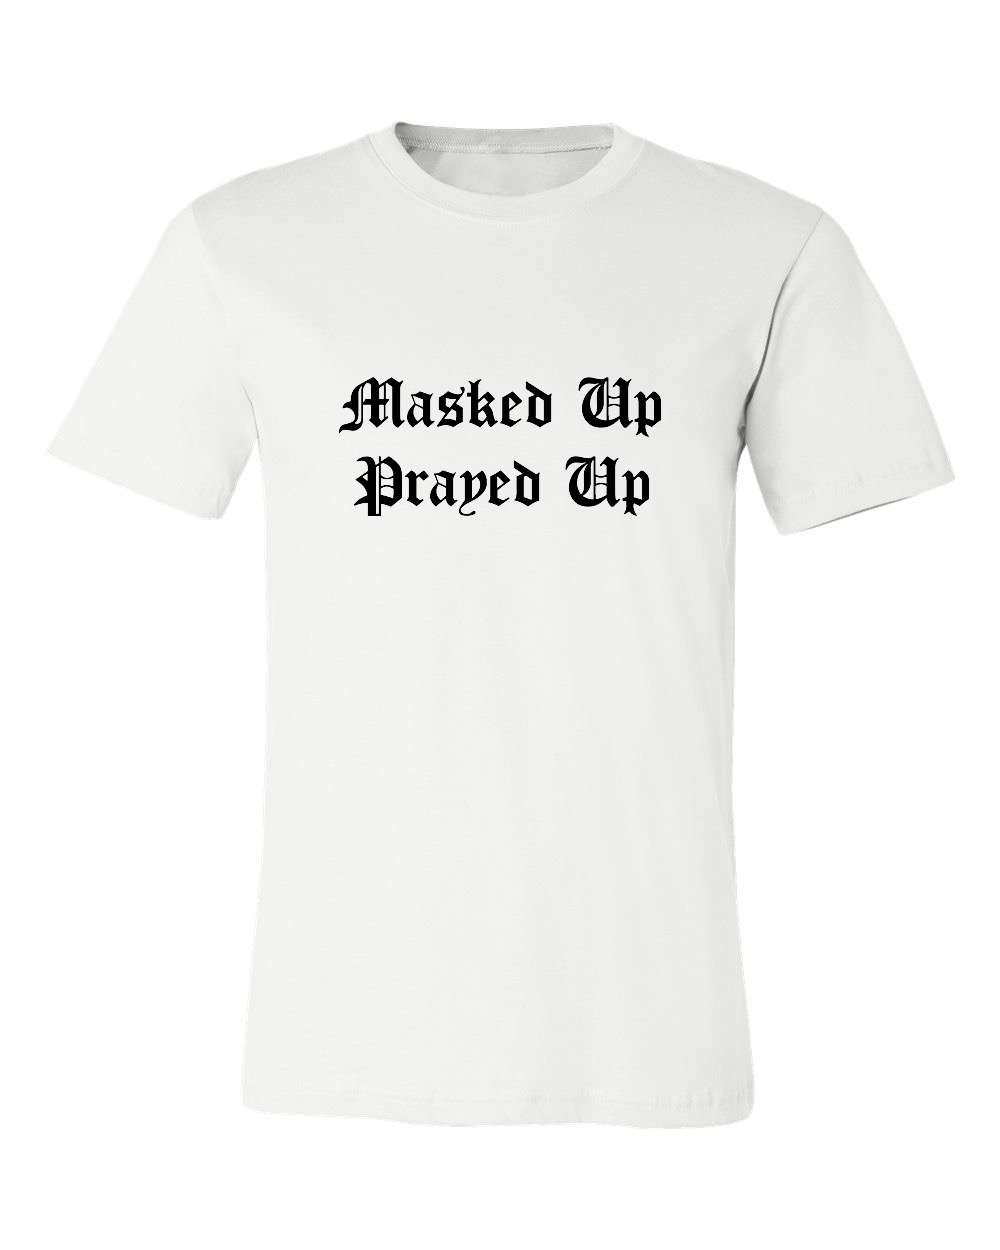 Load image into Gallery viewer, MASKED UP, PRAYED UP T-SHIRT
